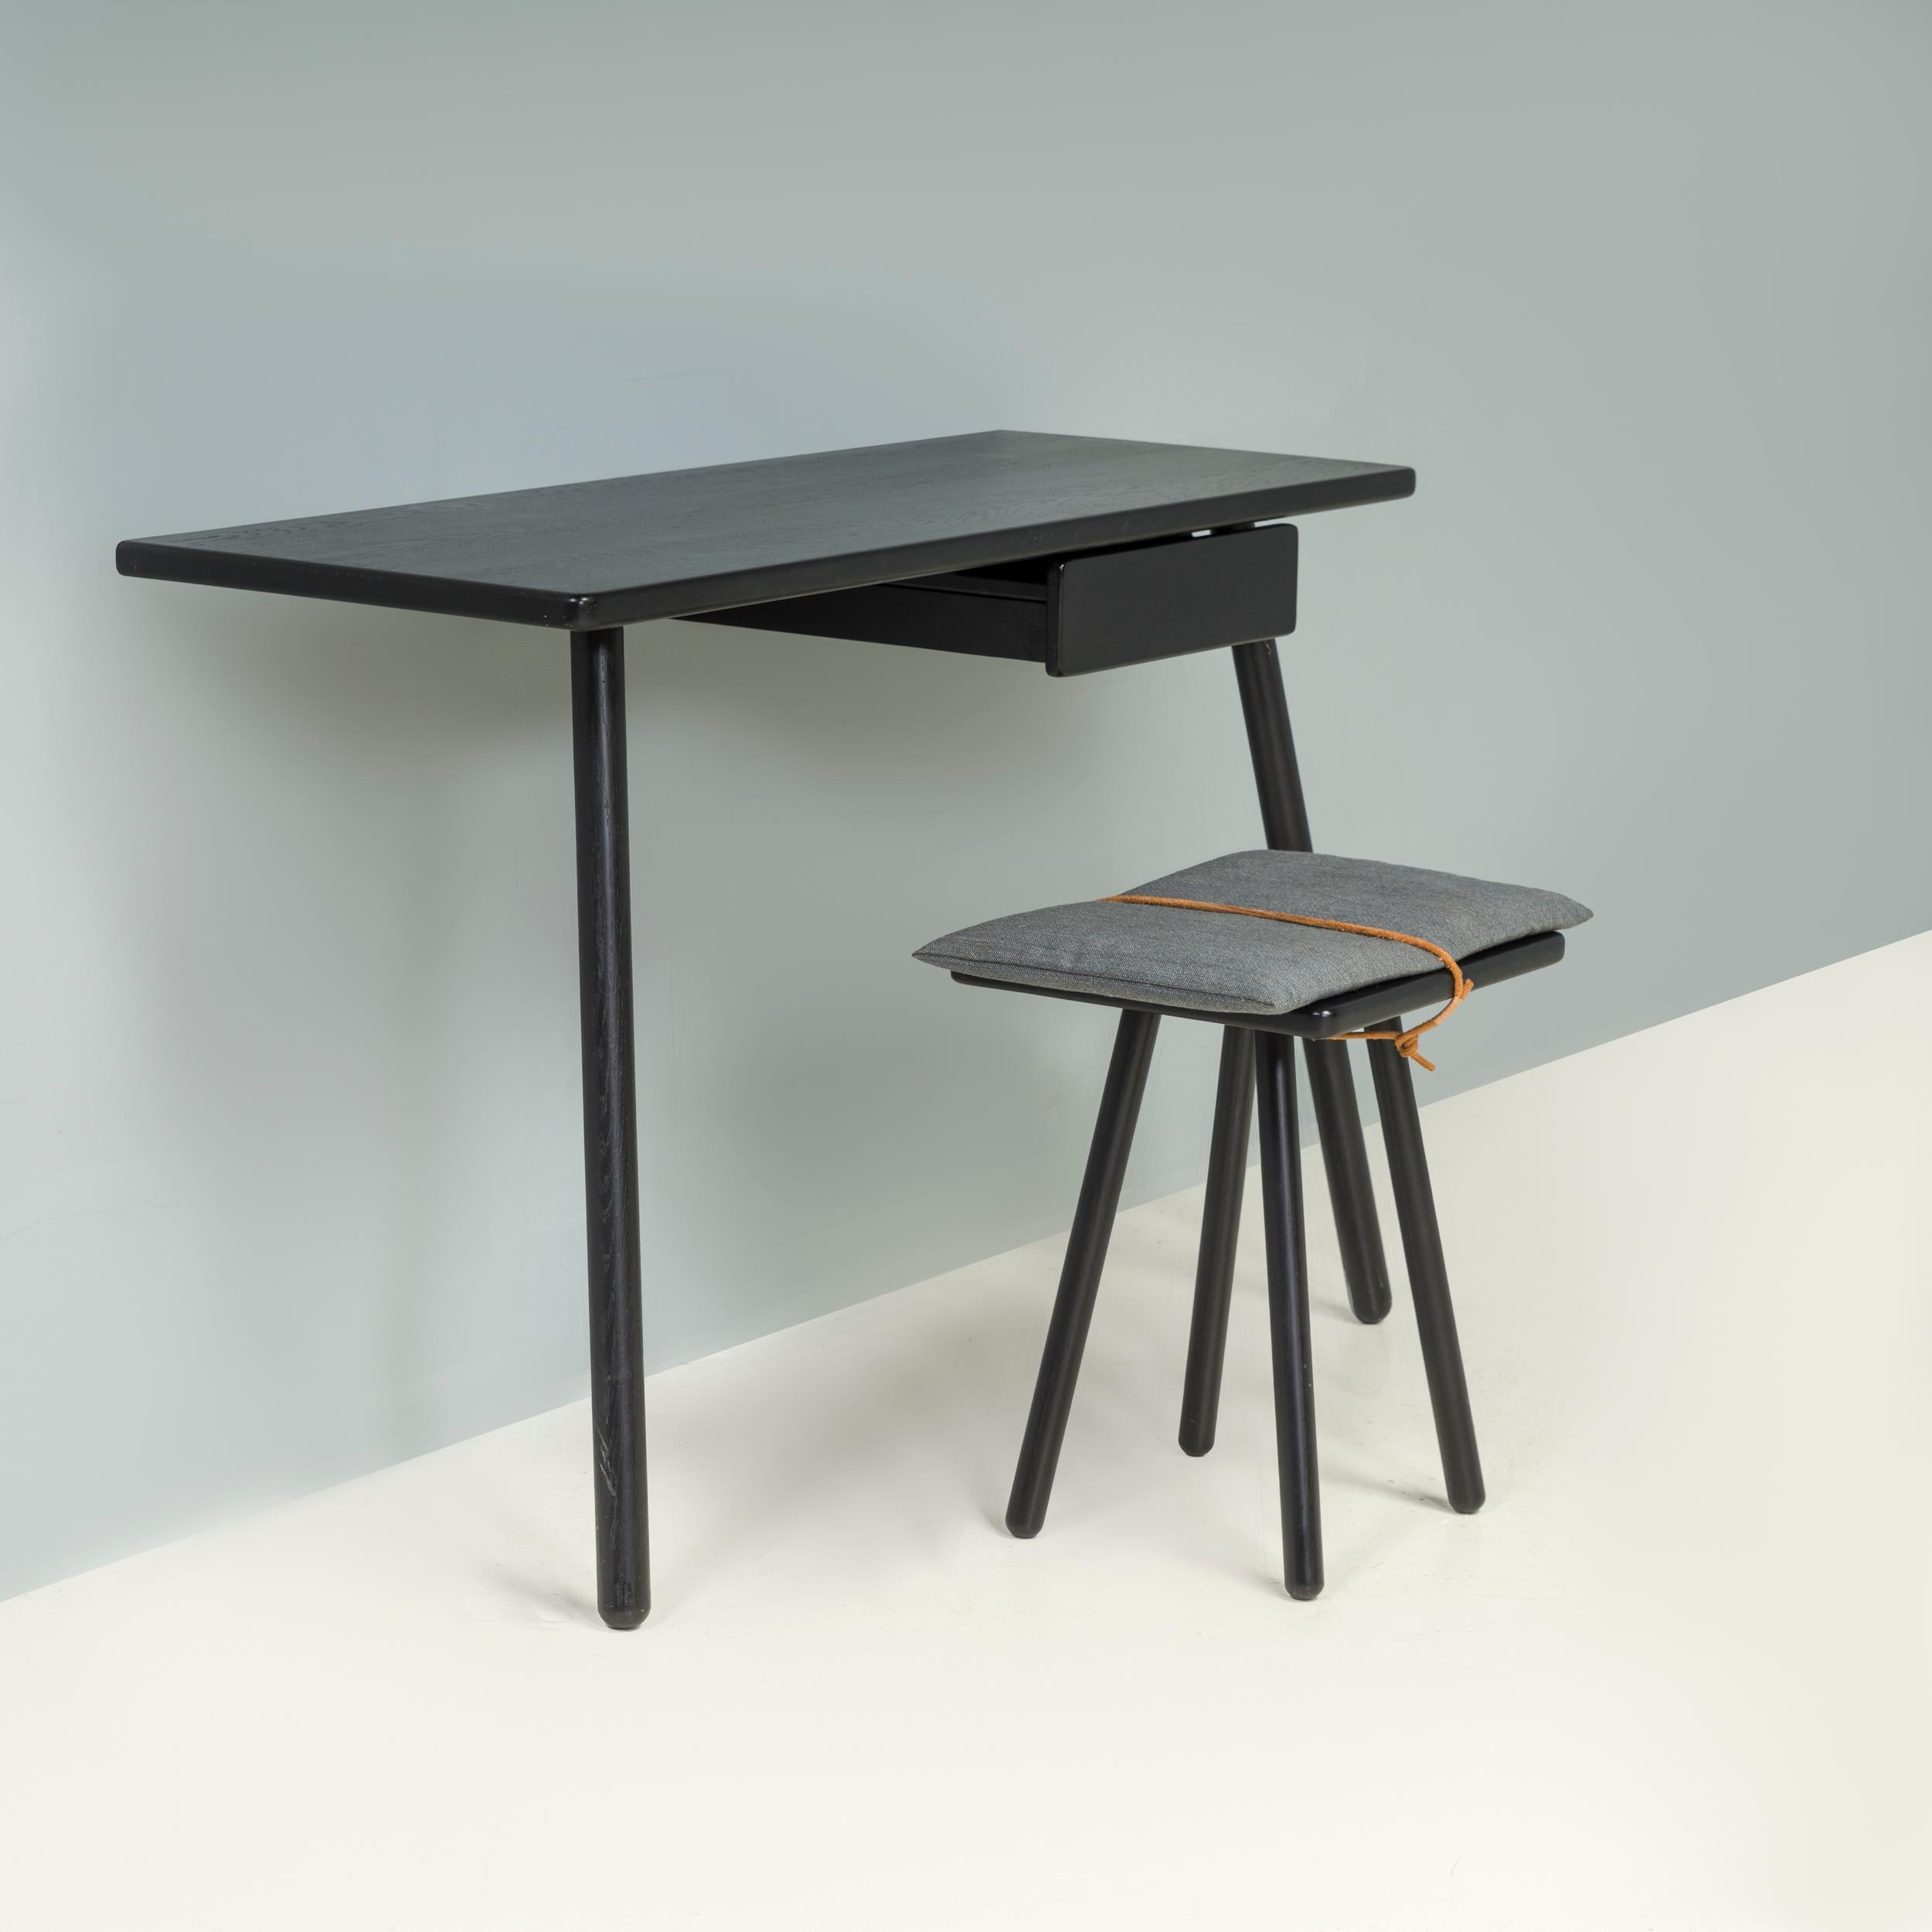 Designed by Chris Liljenberg Halstrøm in 2016, the Georg furniture range is manufactured by Skagerak and is a fantastic example of modern Scandinavian design.

Comprising the Georg console table and Georg stool, this set is constructed from black